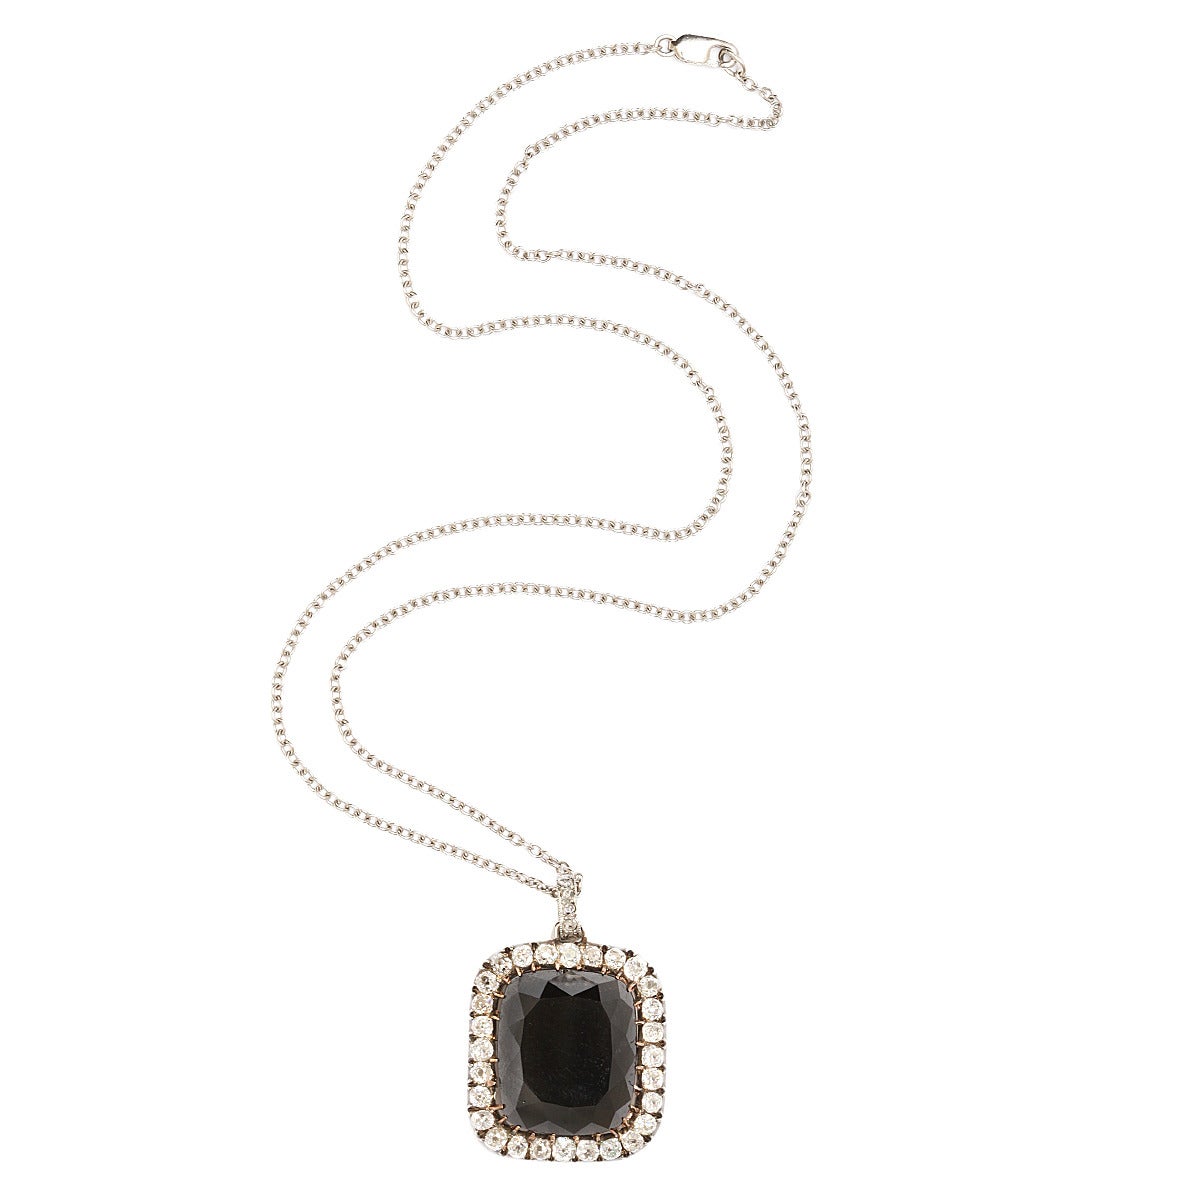 Black diamond and old-mine diamond cluster pendant set in platinum and gold.

English, ca. 1890.
Length: 1 inch (excl. bail)
(Black diamond 37 cts)